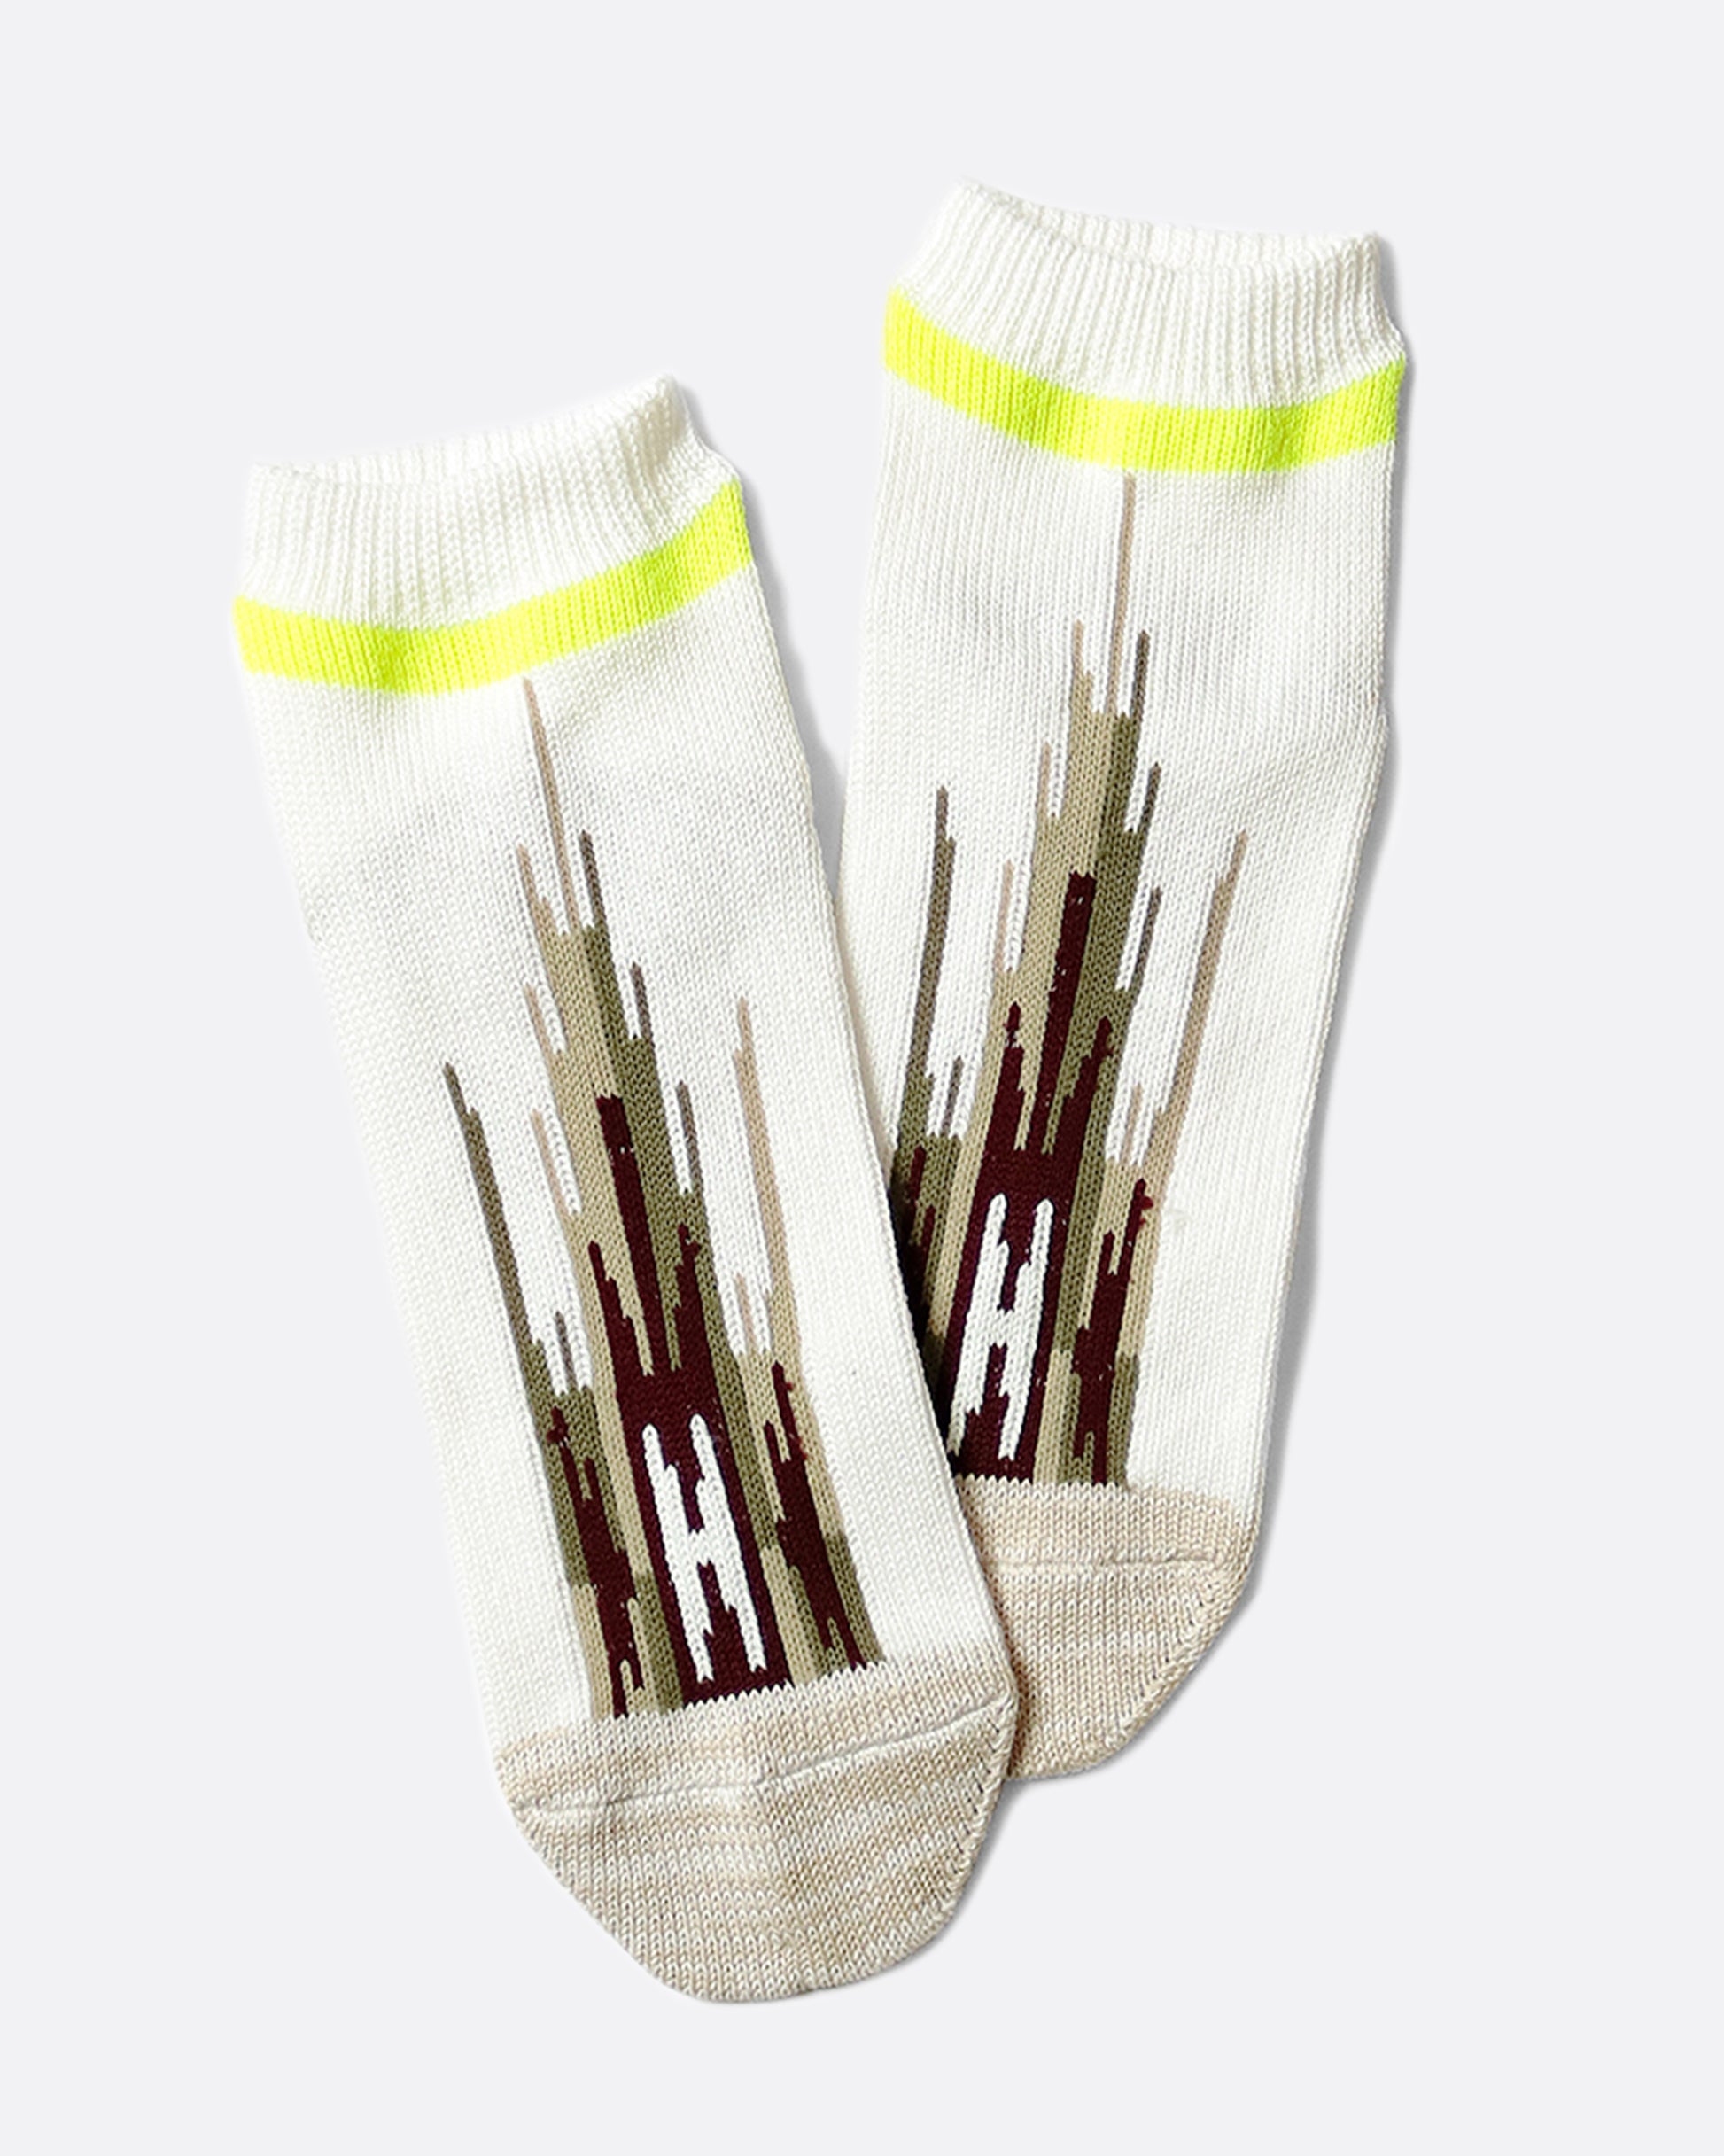 A pair of white socks that hit mid-ankle with an Ortega pattern across the top of the foot in shades of brown, and a neon green band at the top.